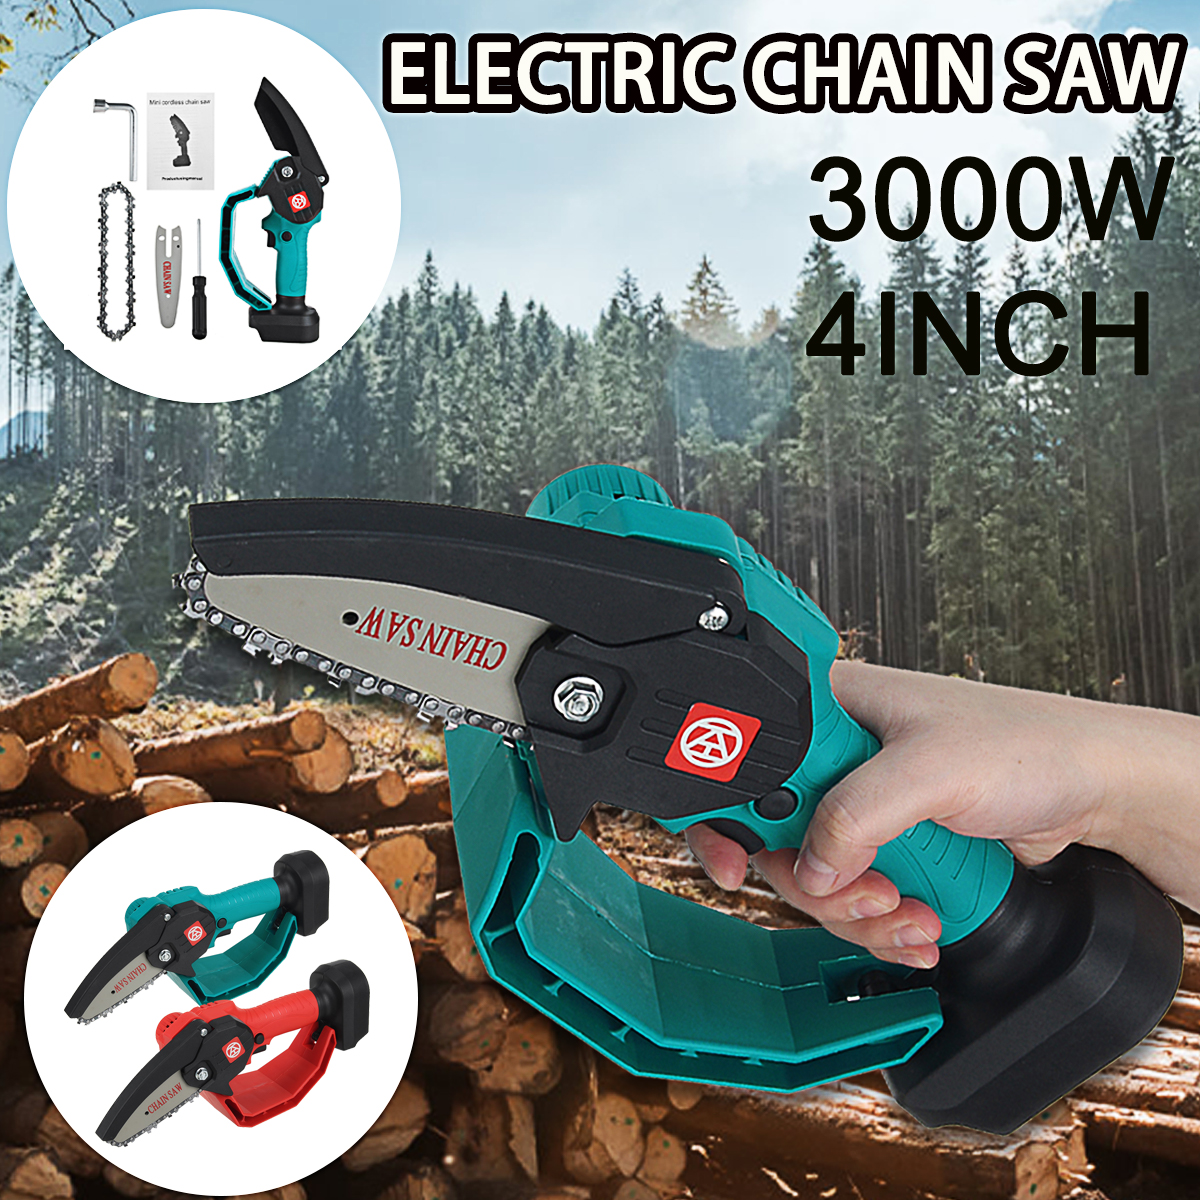 3000W-4-Inch-Electric-Chain-Saw-Portable-One-Hand-Saw-Carpentry-Mini-chainsaw-Garden-Tool-For-Makita-1878451-2